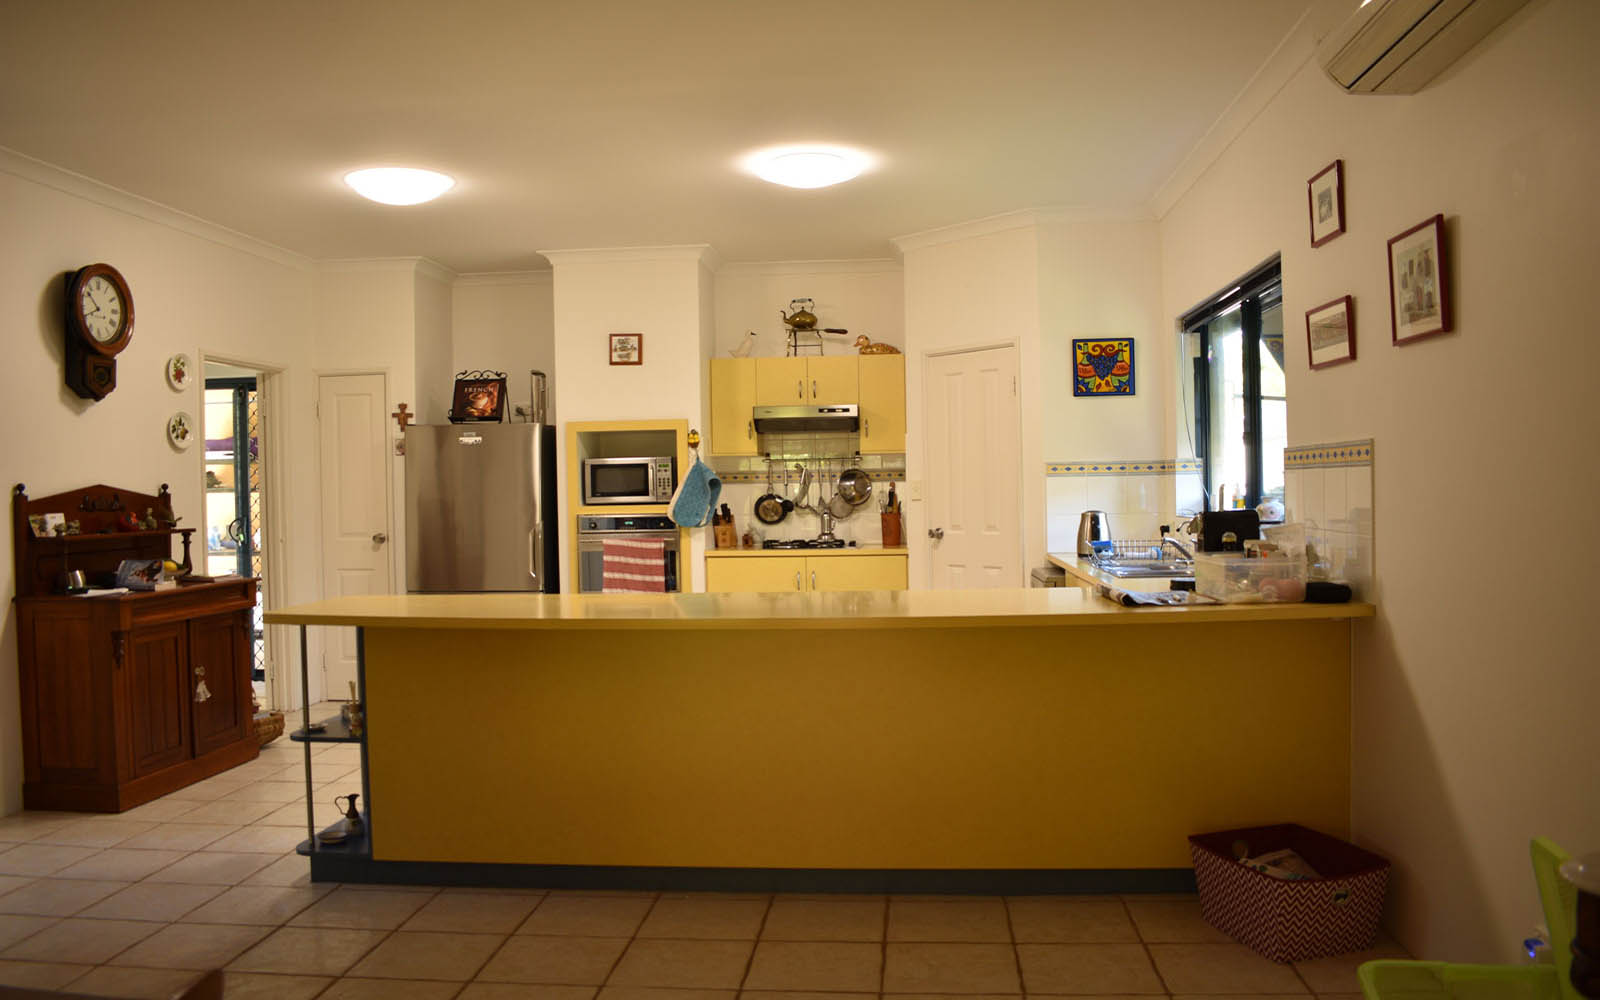 Kitchen Renovation Perth Before & After